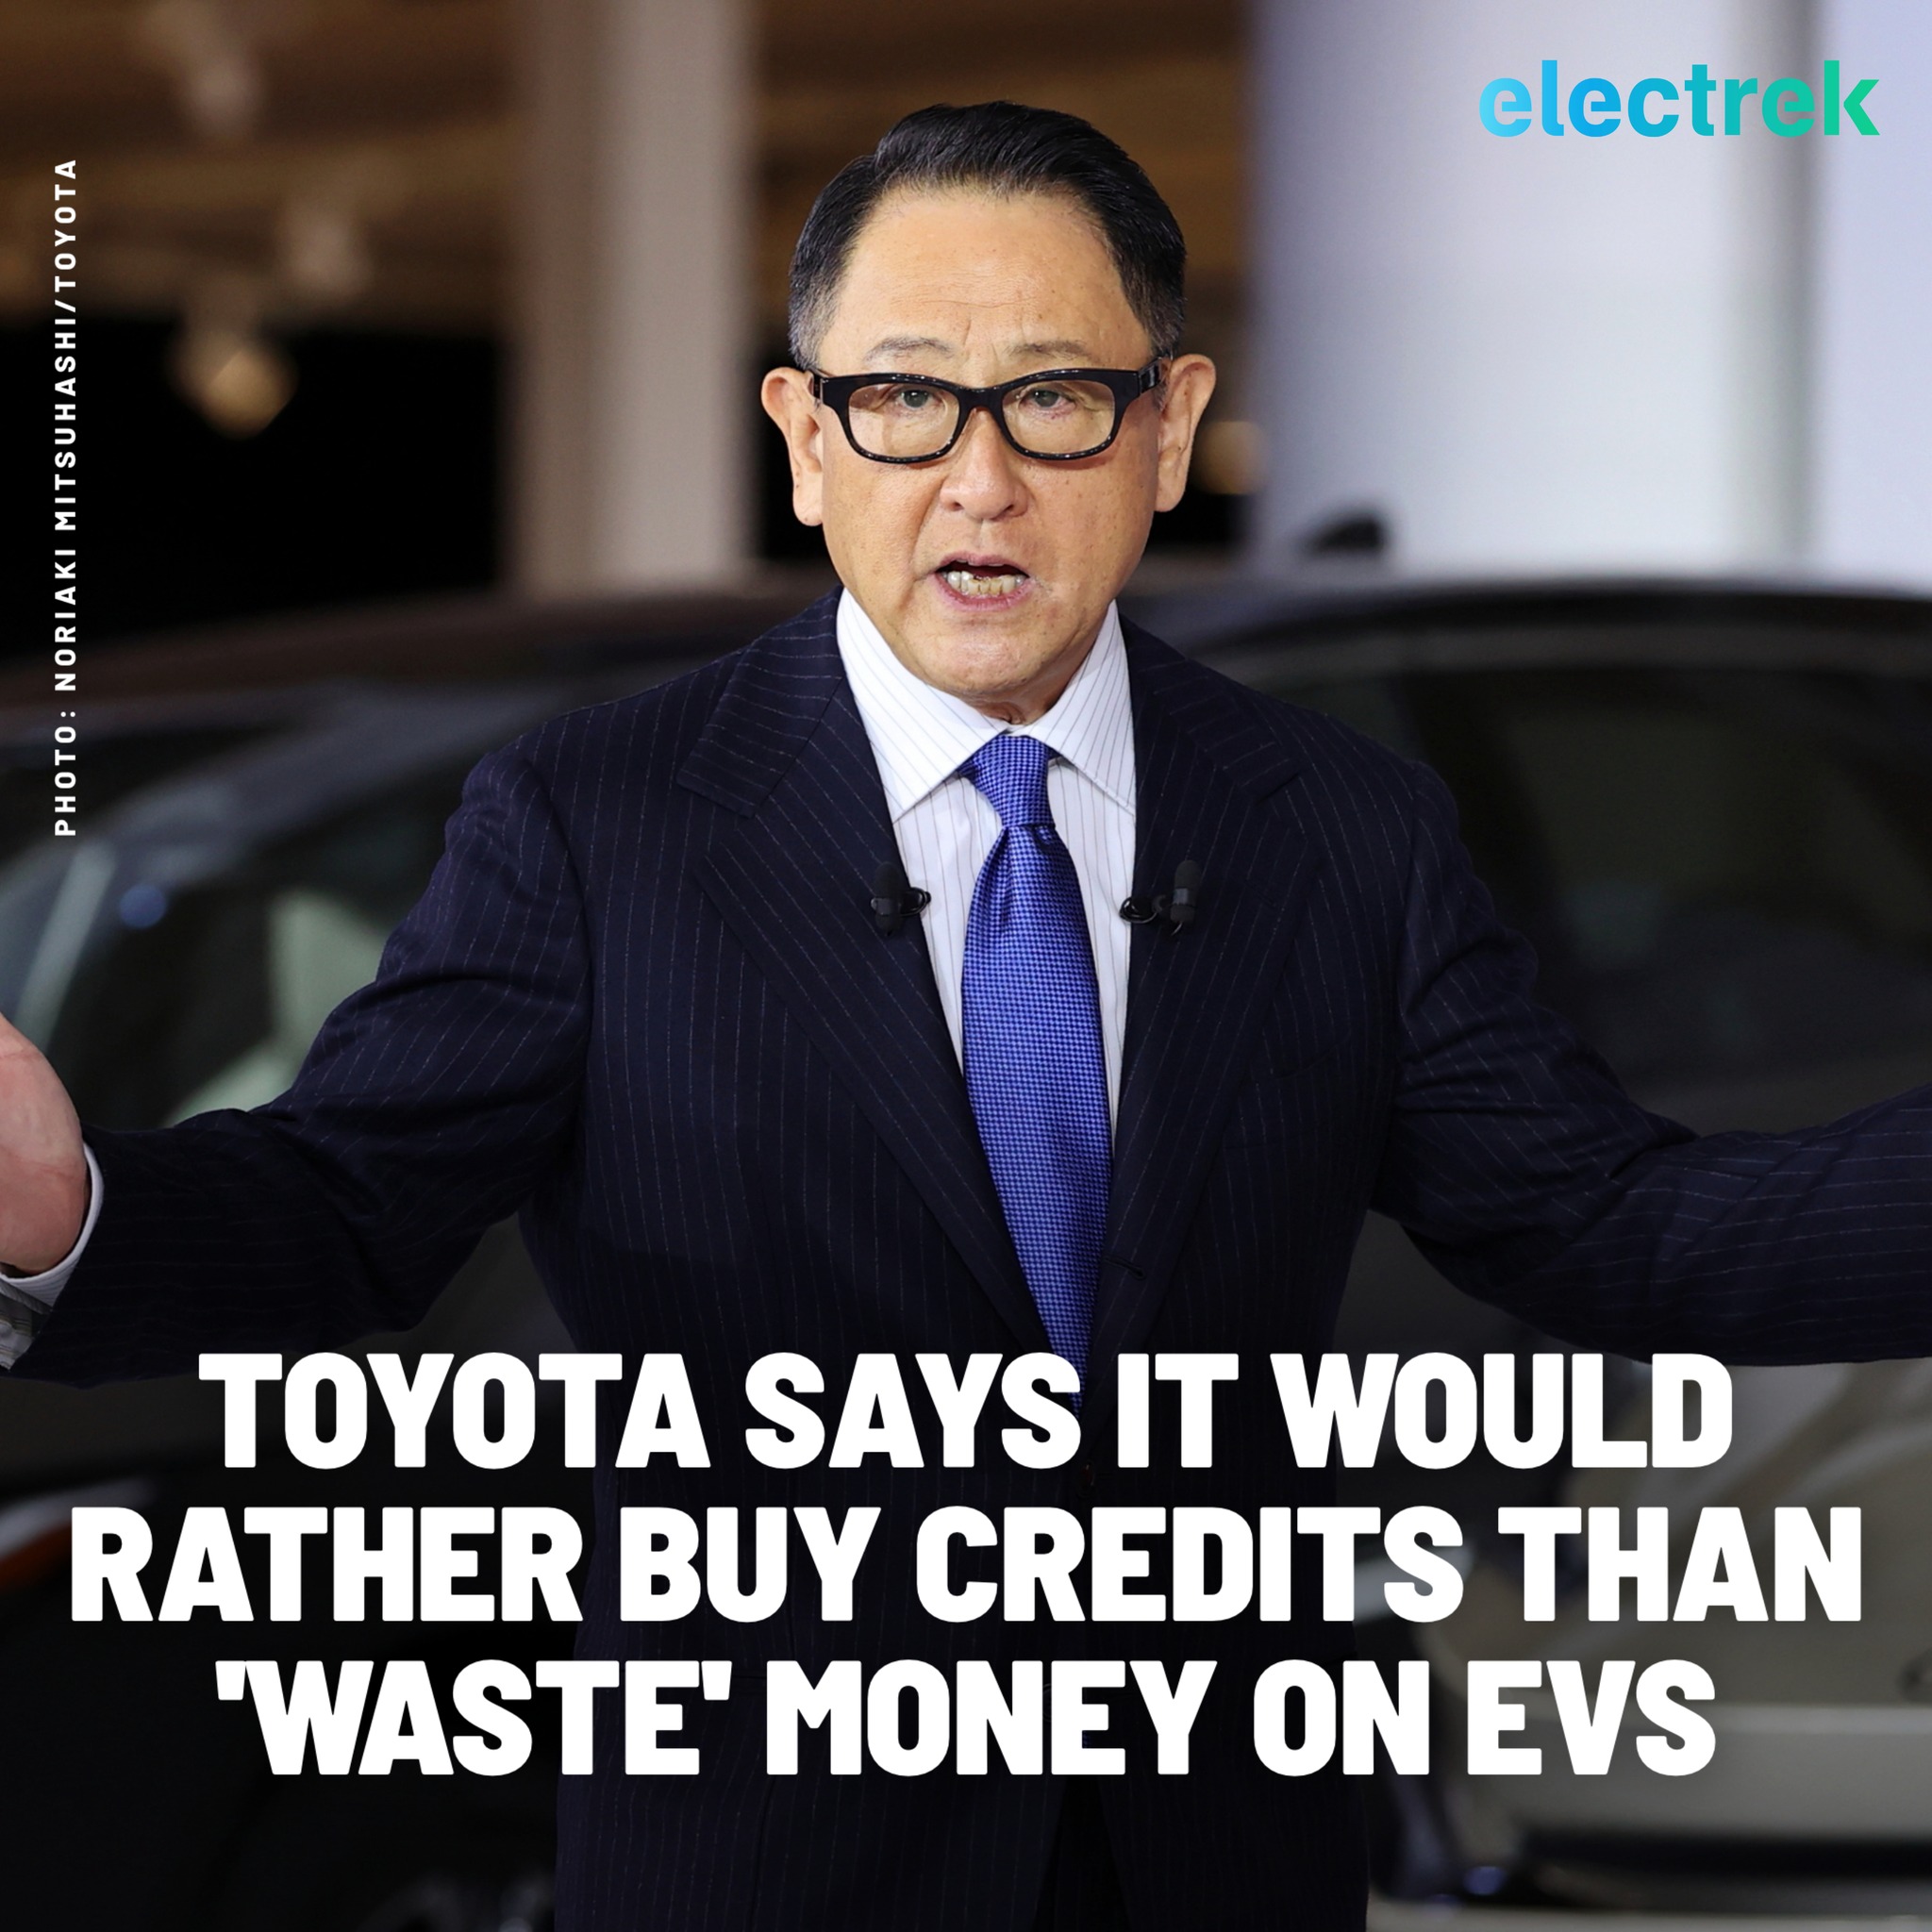 Sadly, Toyota Rejects Electric Transportation